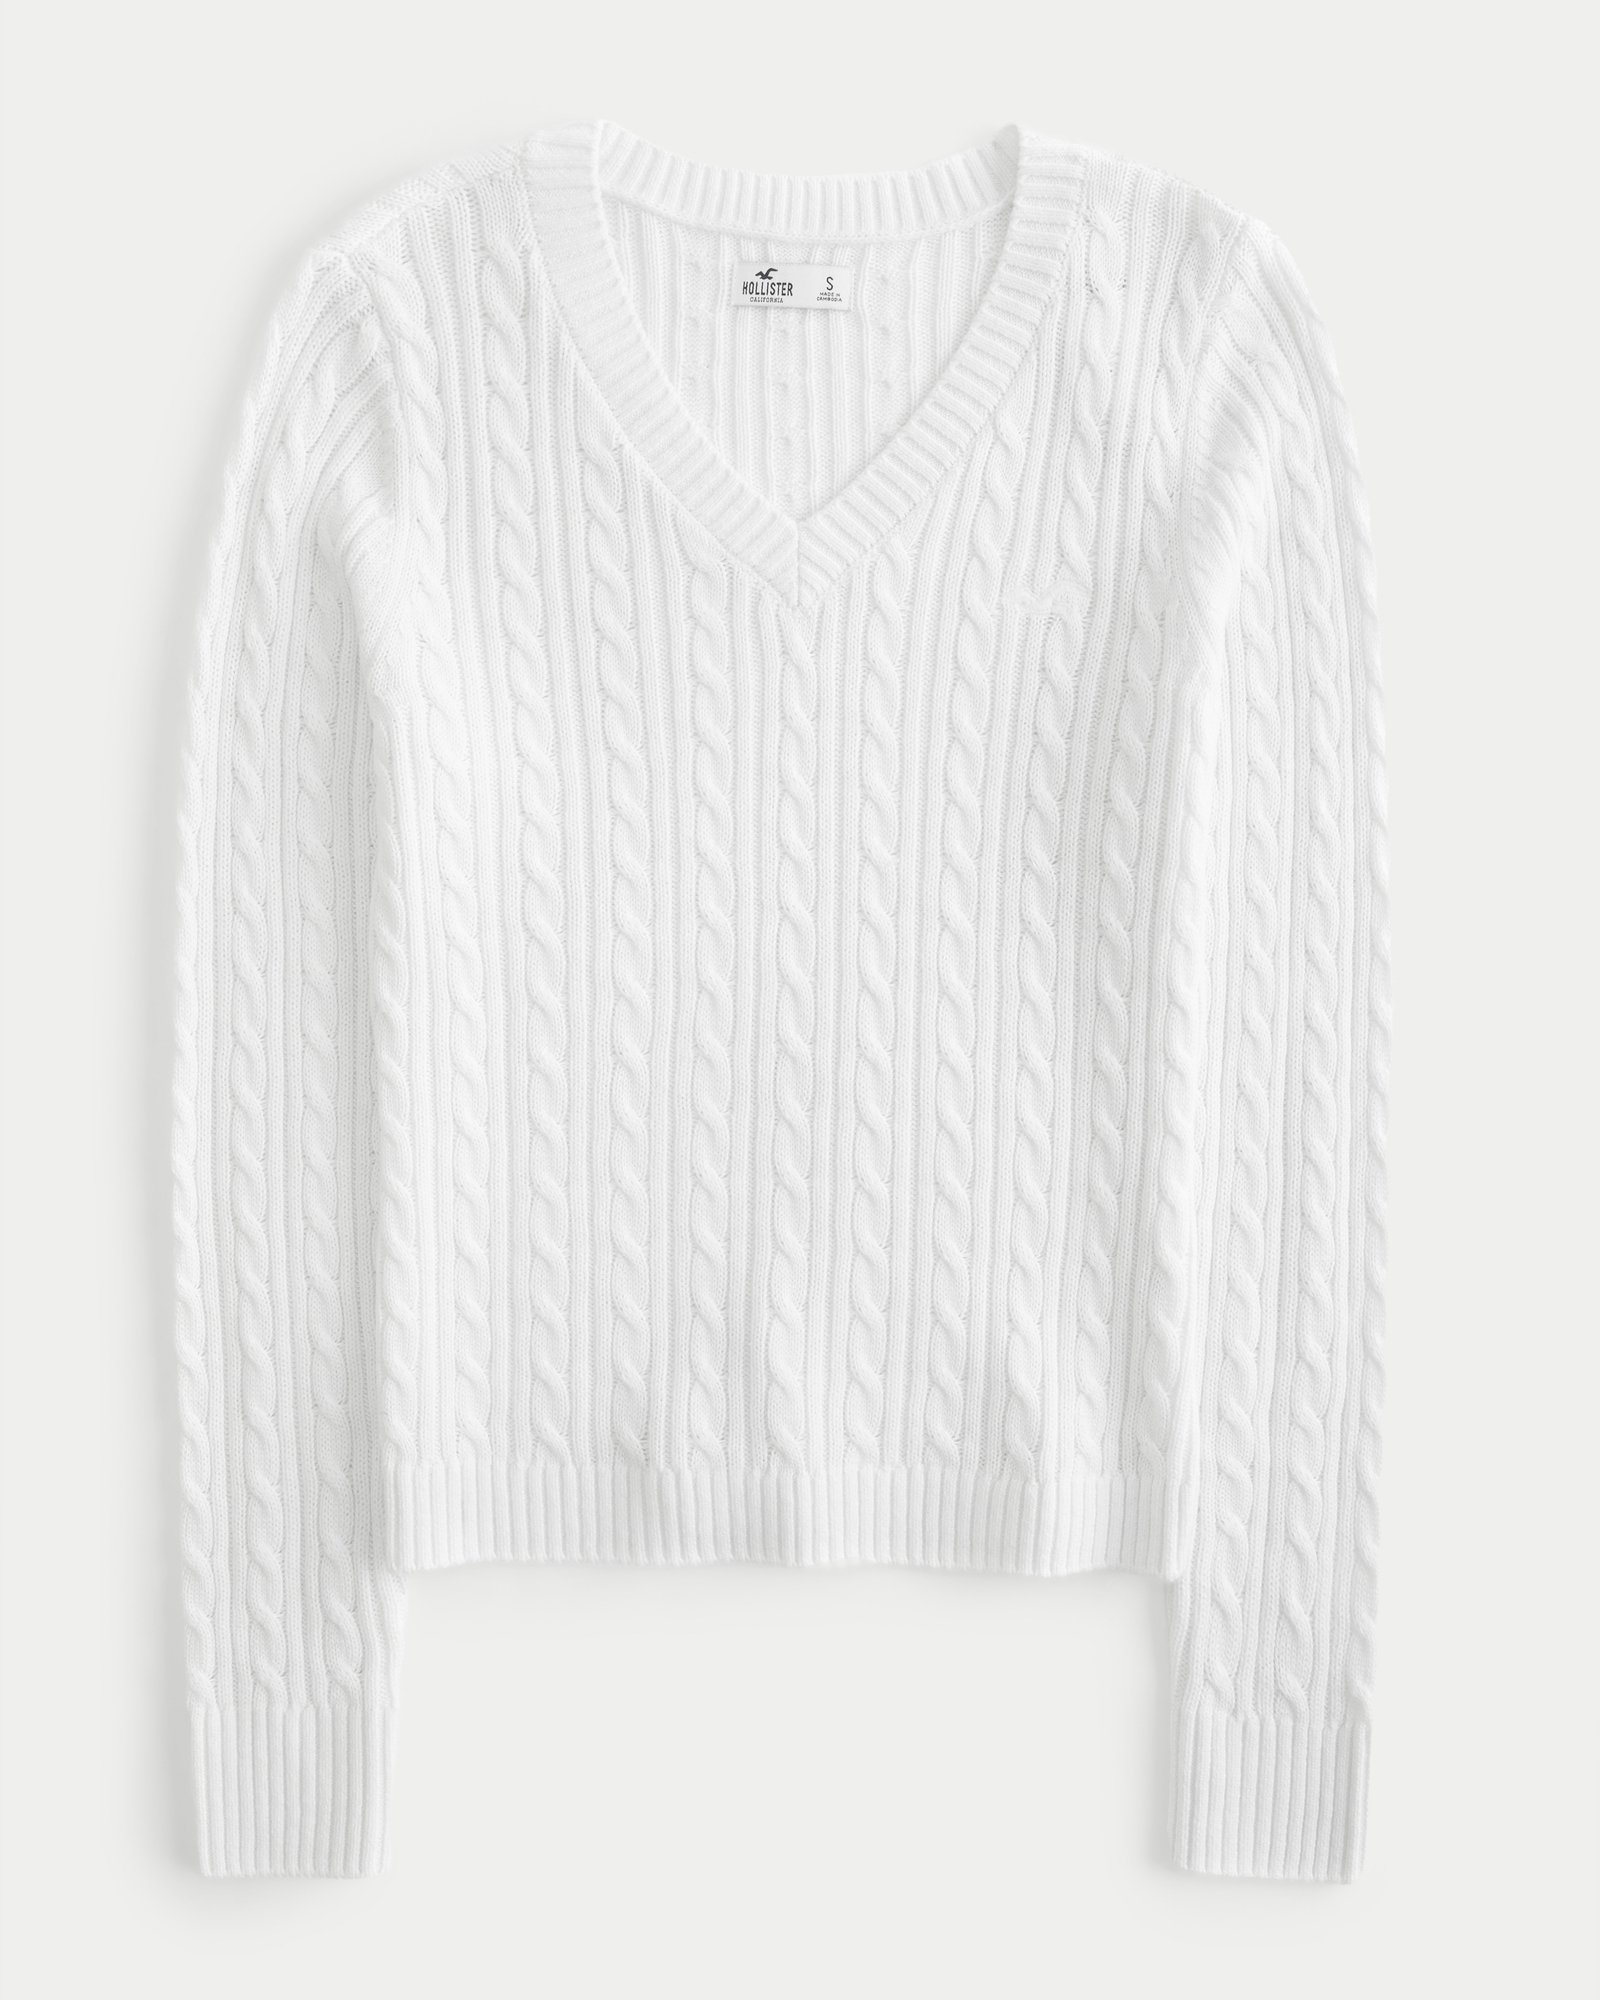 Women's Cable-Knit V-Neck Sweater, Women's Tops